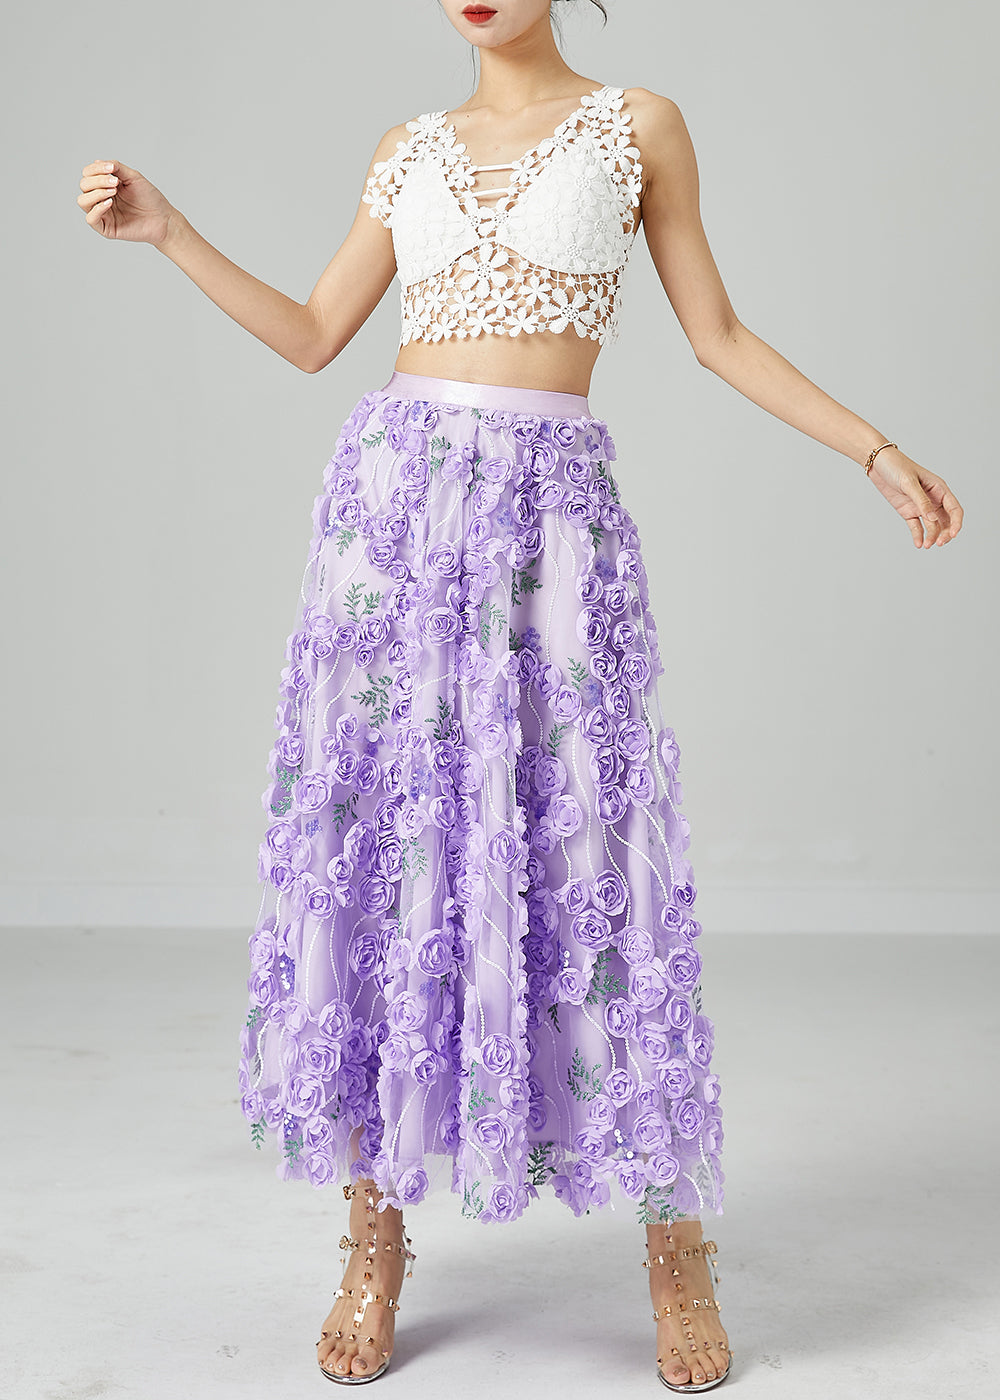 Beautiful Light Purple Embroideried Floral Tulle Skirts Summer